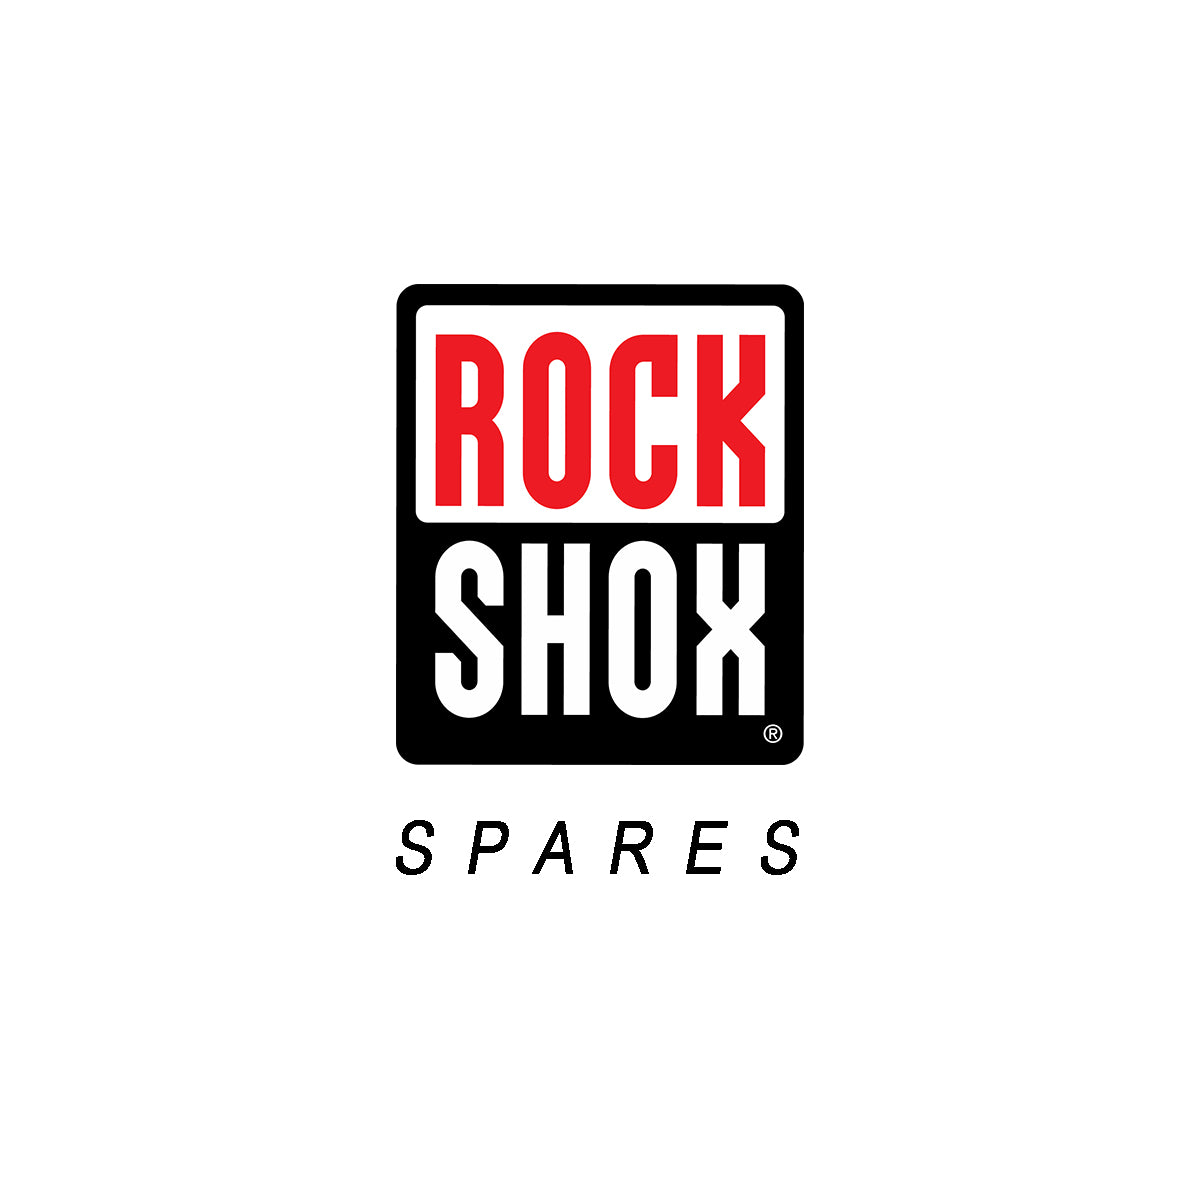 Rockshox Spare - Seatpost Service 400 Hour/2 Year Service Kit Includes New Upgraded Ifp; Requires Post Bleed Tool, Oil Height Tool And Ifp Height Tool Reverb Stealth B1(2017)